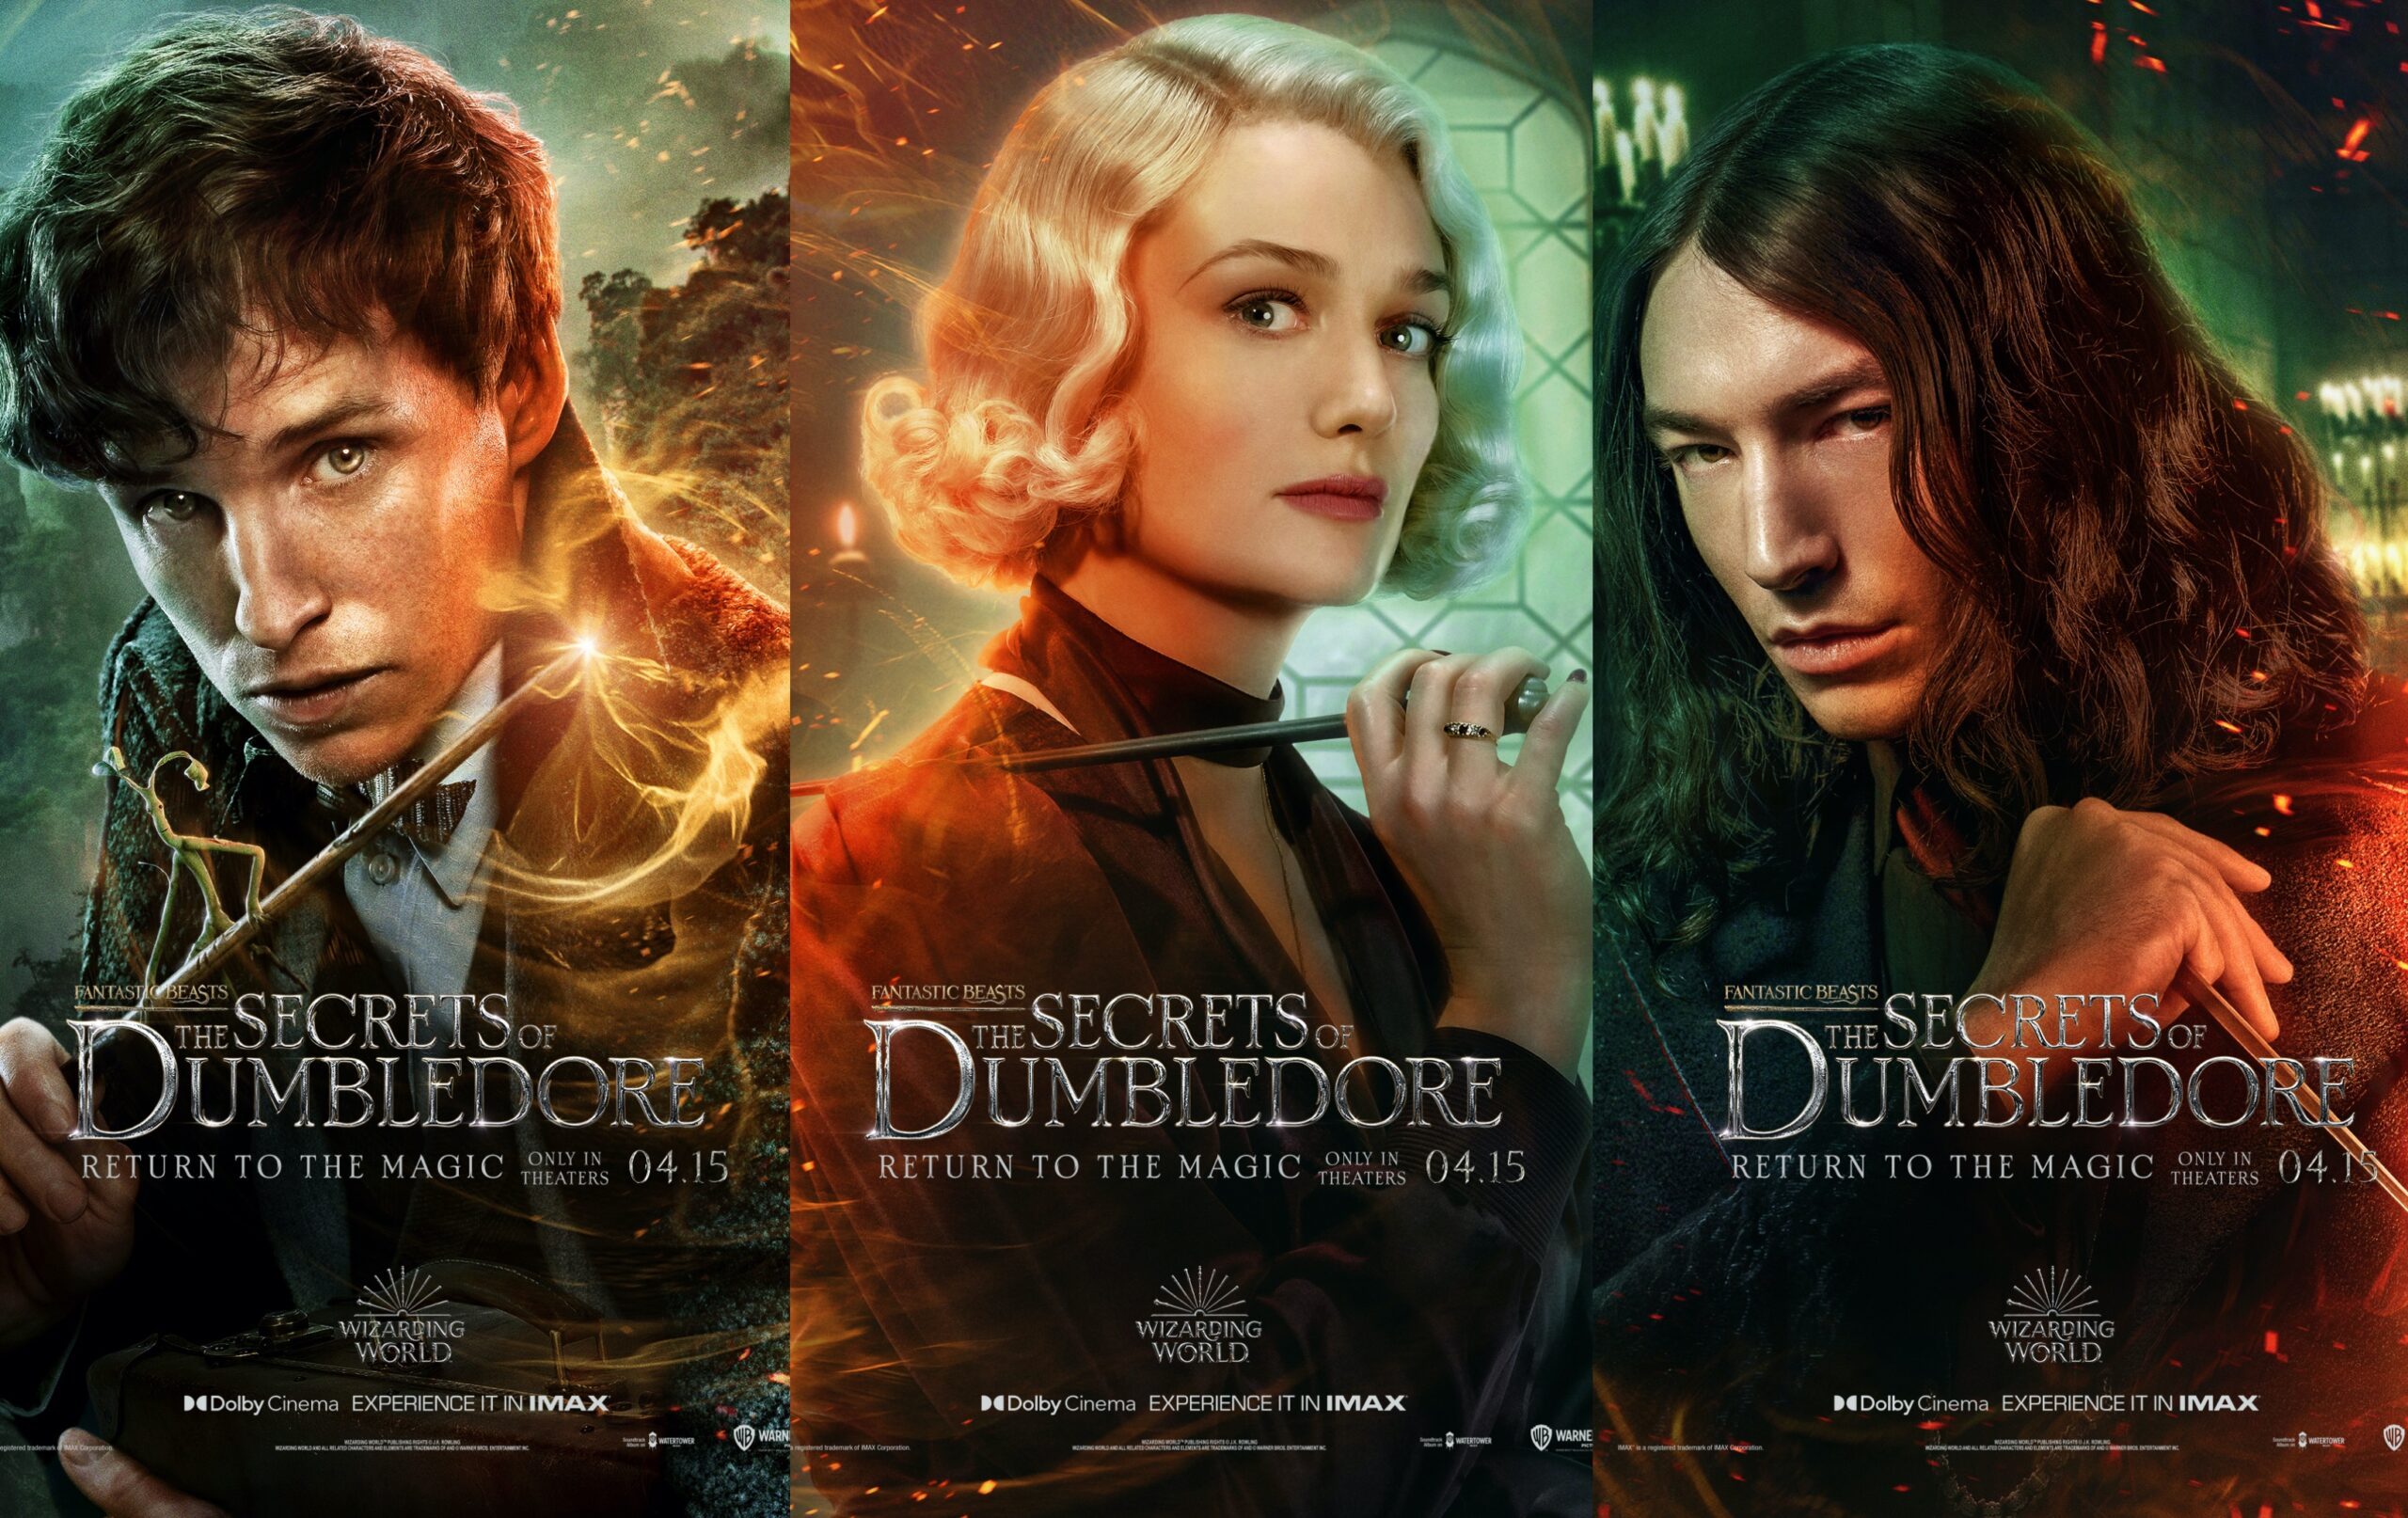 LOOK: ‘Fantastic Beasts: The Secrets of Dumbledore’ releases new character posters